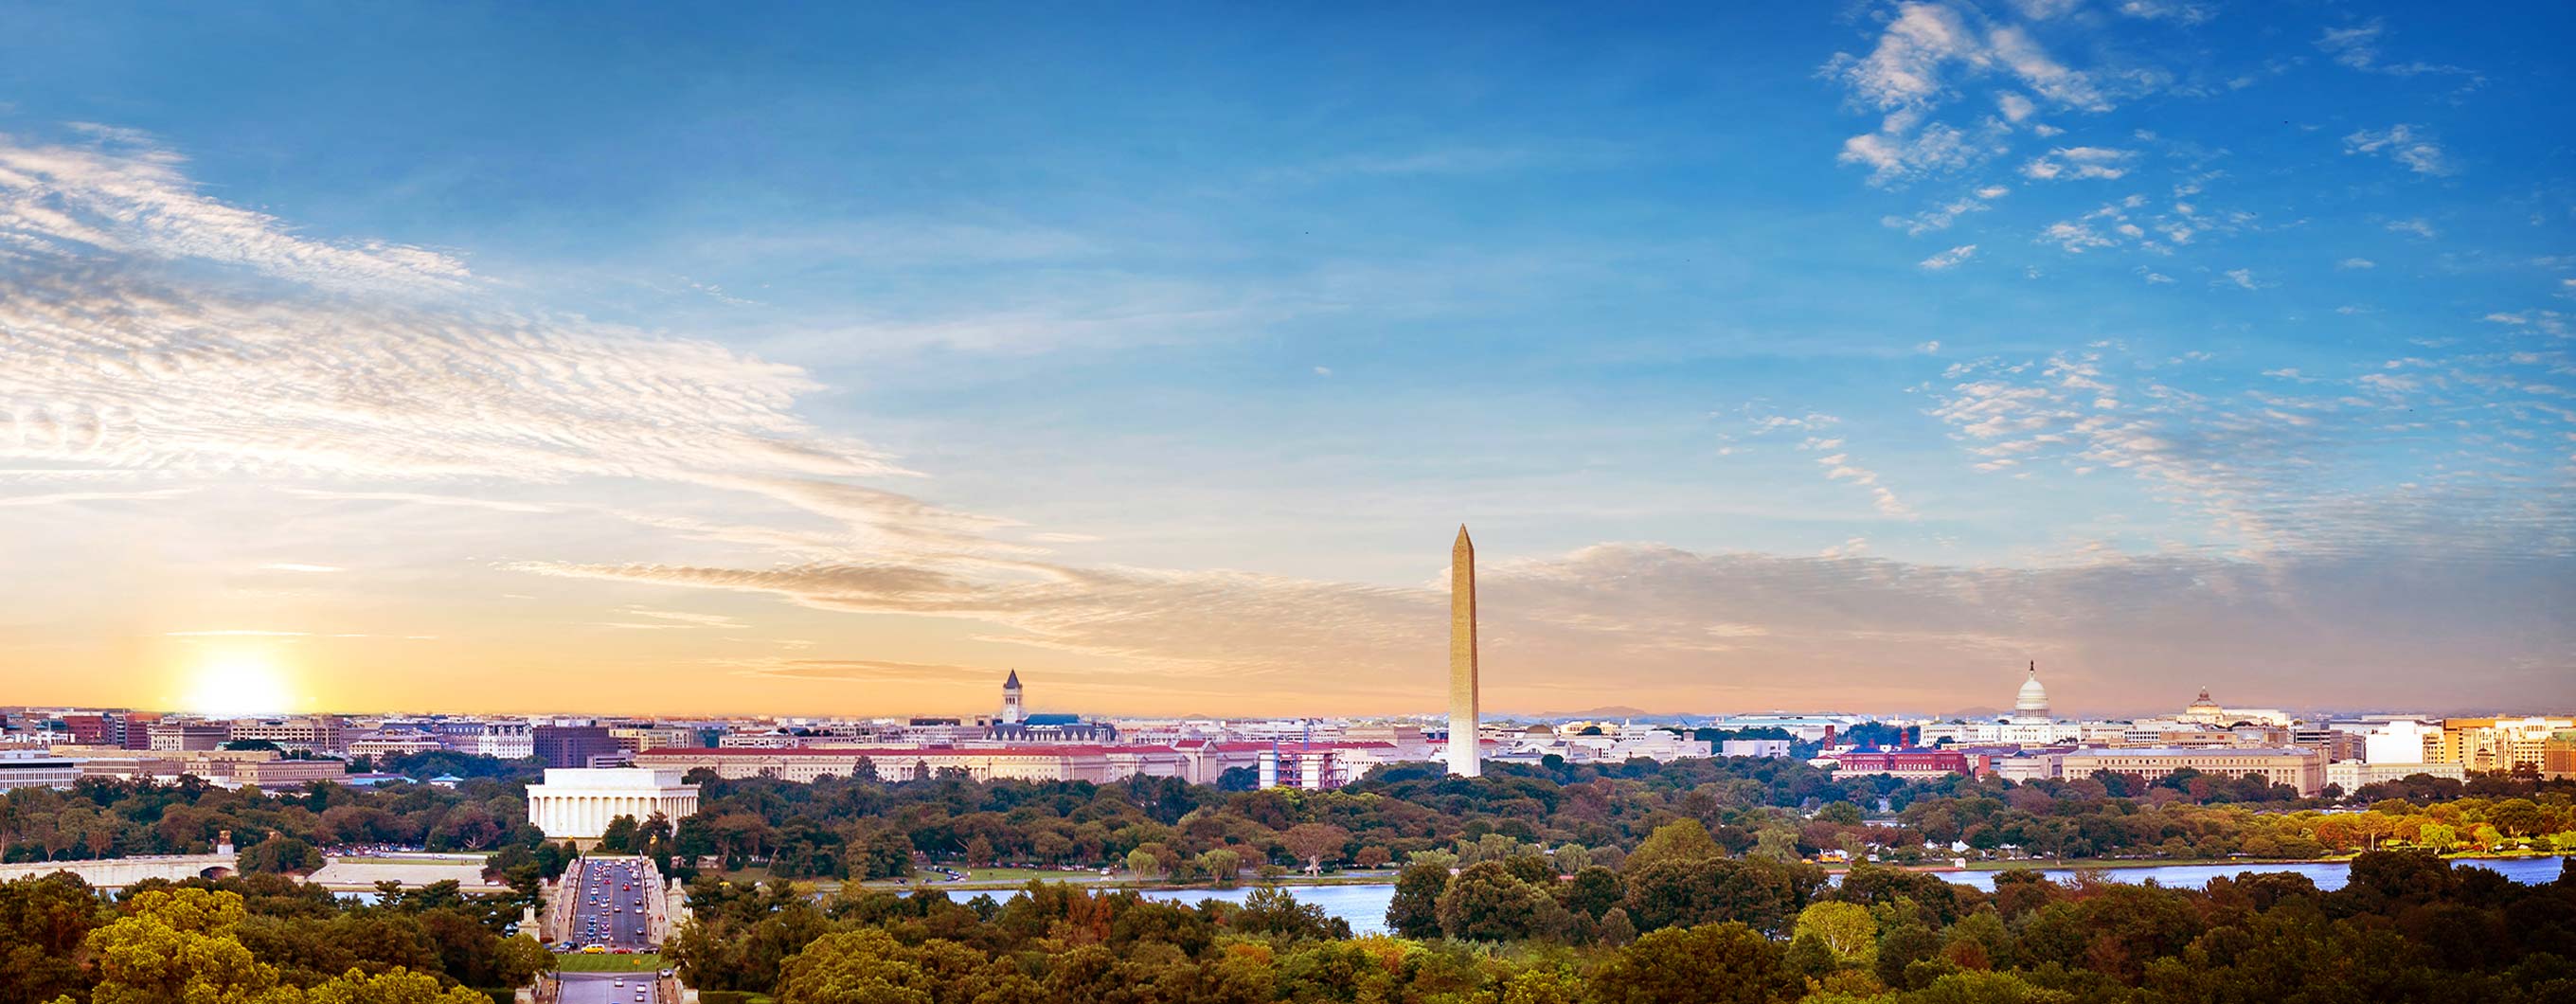 Image of the washington dc skyline with the sunsetting behind